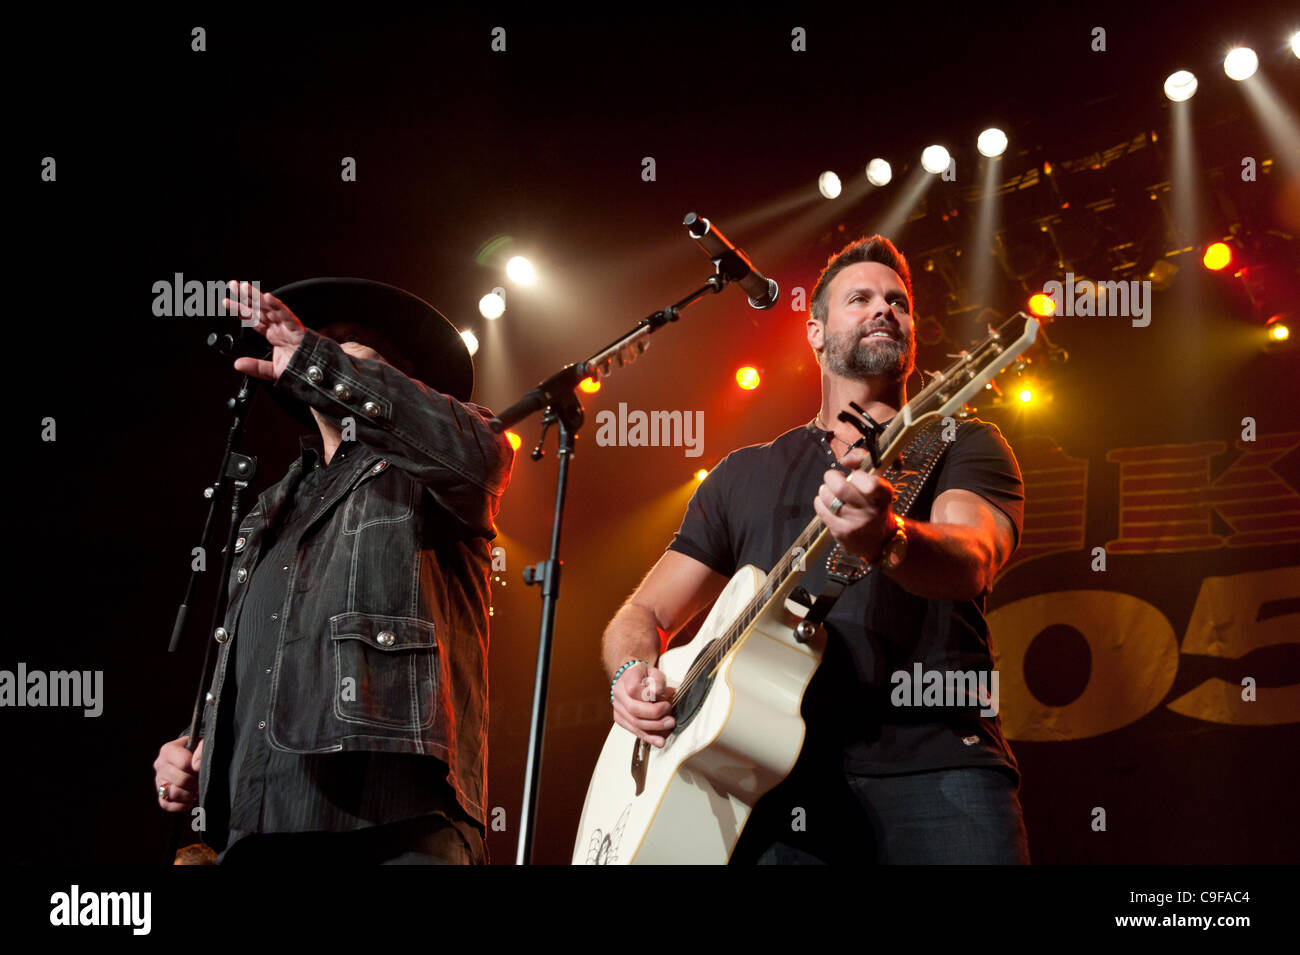 SACRAMENTO, CA - December 10: Montgomery Gentry performs in KNCI's Country xmas at Power Balance Pavilion in Sacramento, California on December 10, 2011 Stock Photo